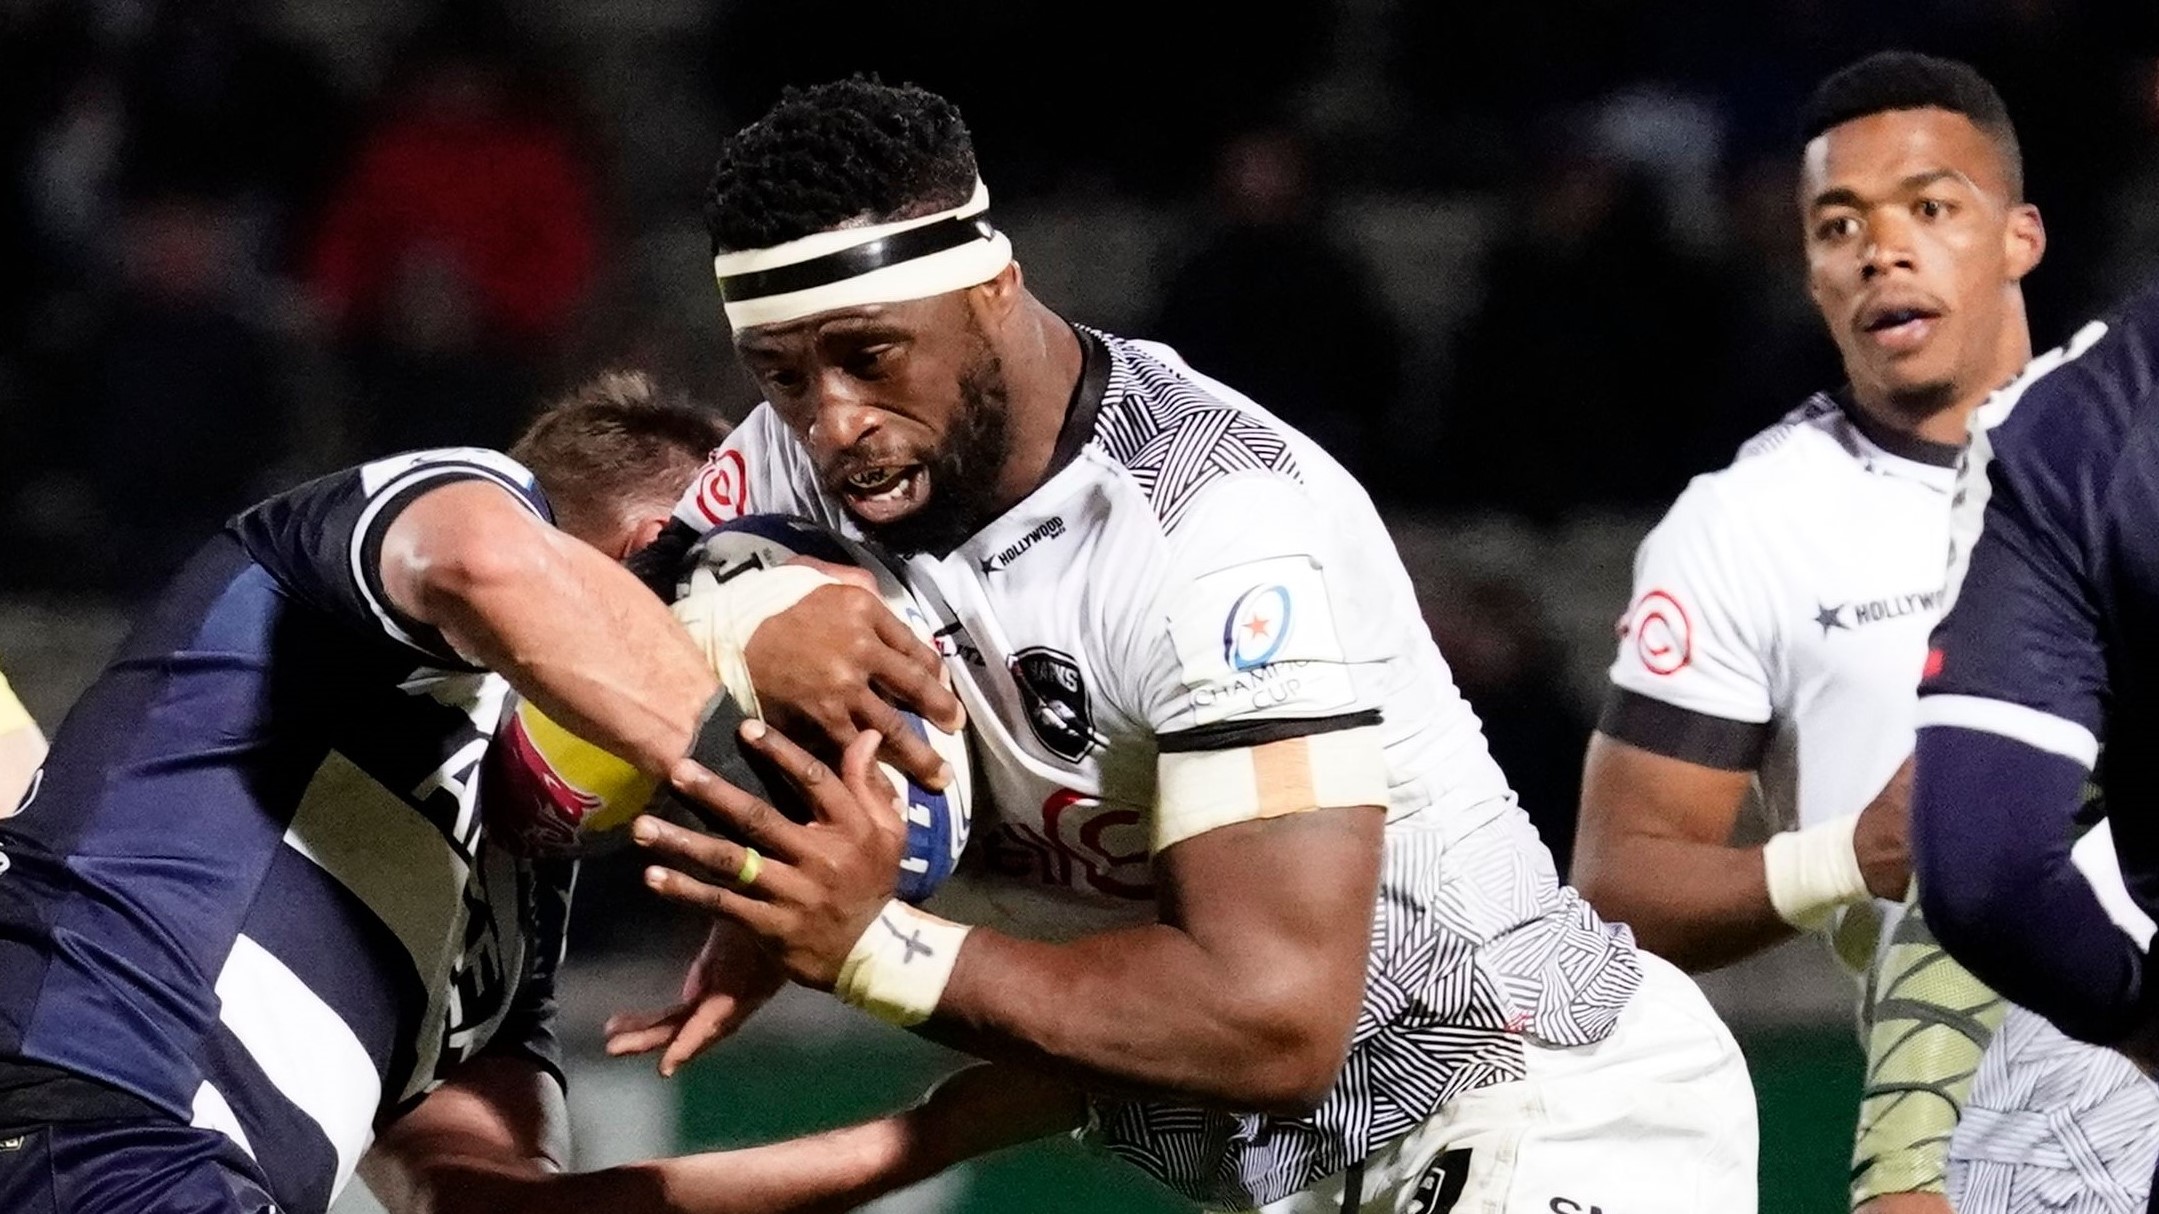 Mandatory Credit: Photo by Dave Winter/INPHO/Shutterstock/BackpagePix (13671013bc) Bordeaux-Begles vs Cell C Sharks. Siya Kolisi of the Cell C Sharks Heineken Champions Cup Round 2 Pool A, Stade Chaban-Delmas, Bordeaux, France - 16 Dec 2022